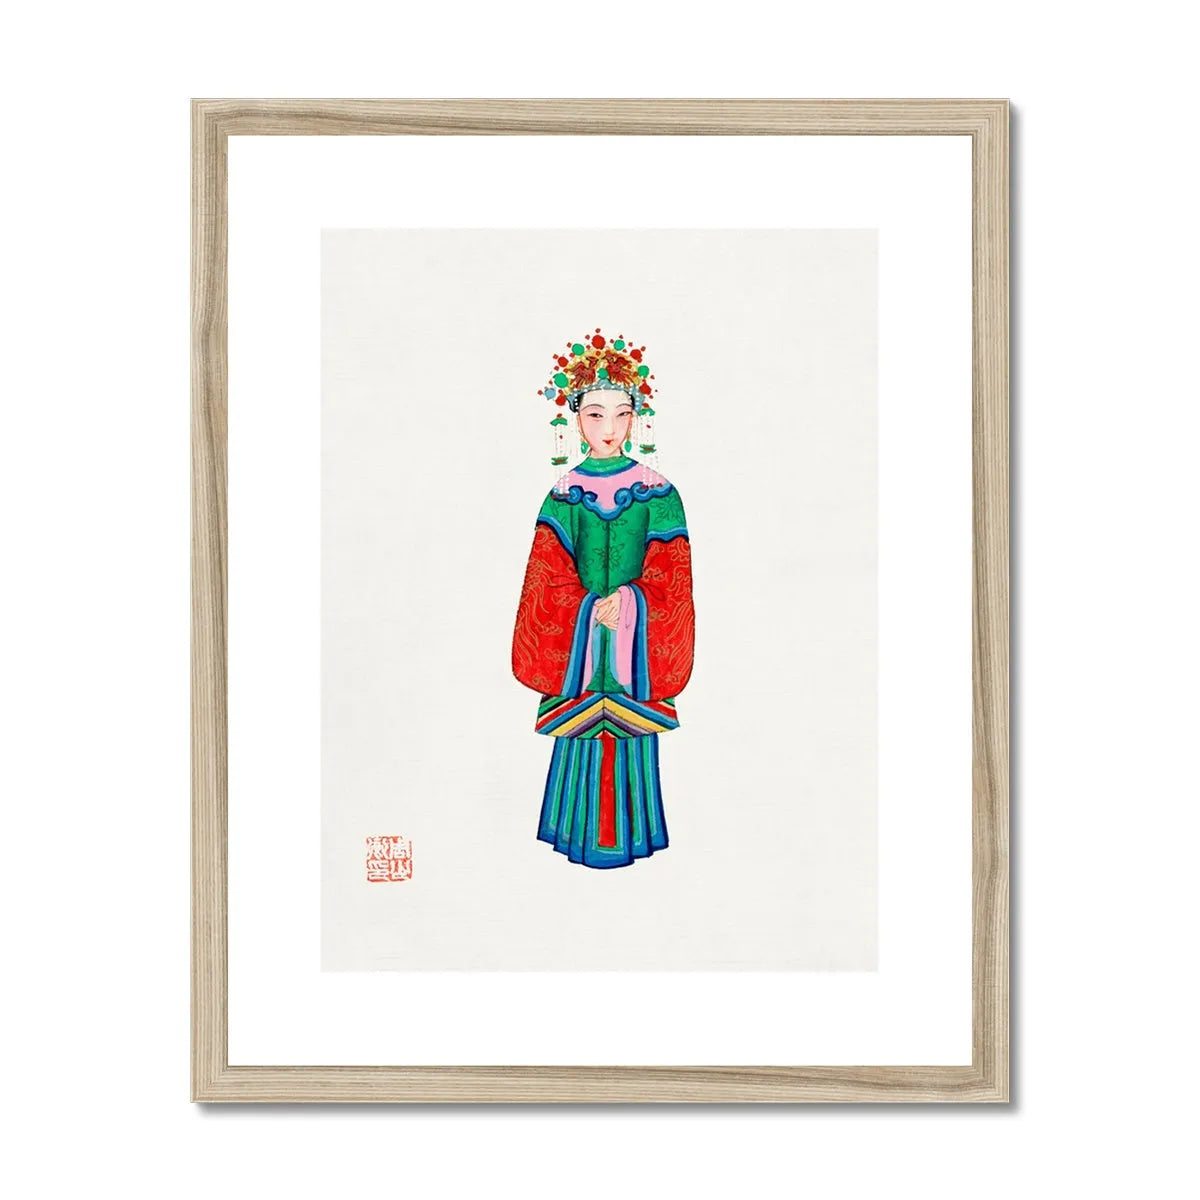 Chinese Imperial Princess Framed & Mounted Print - 16’x20’ / Natural Frame - Posters Prints & Visual Artwork